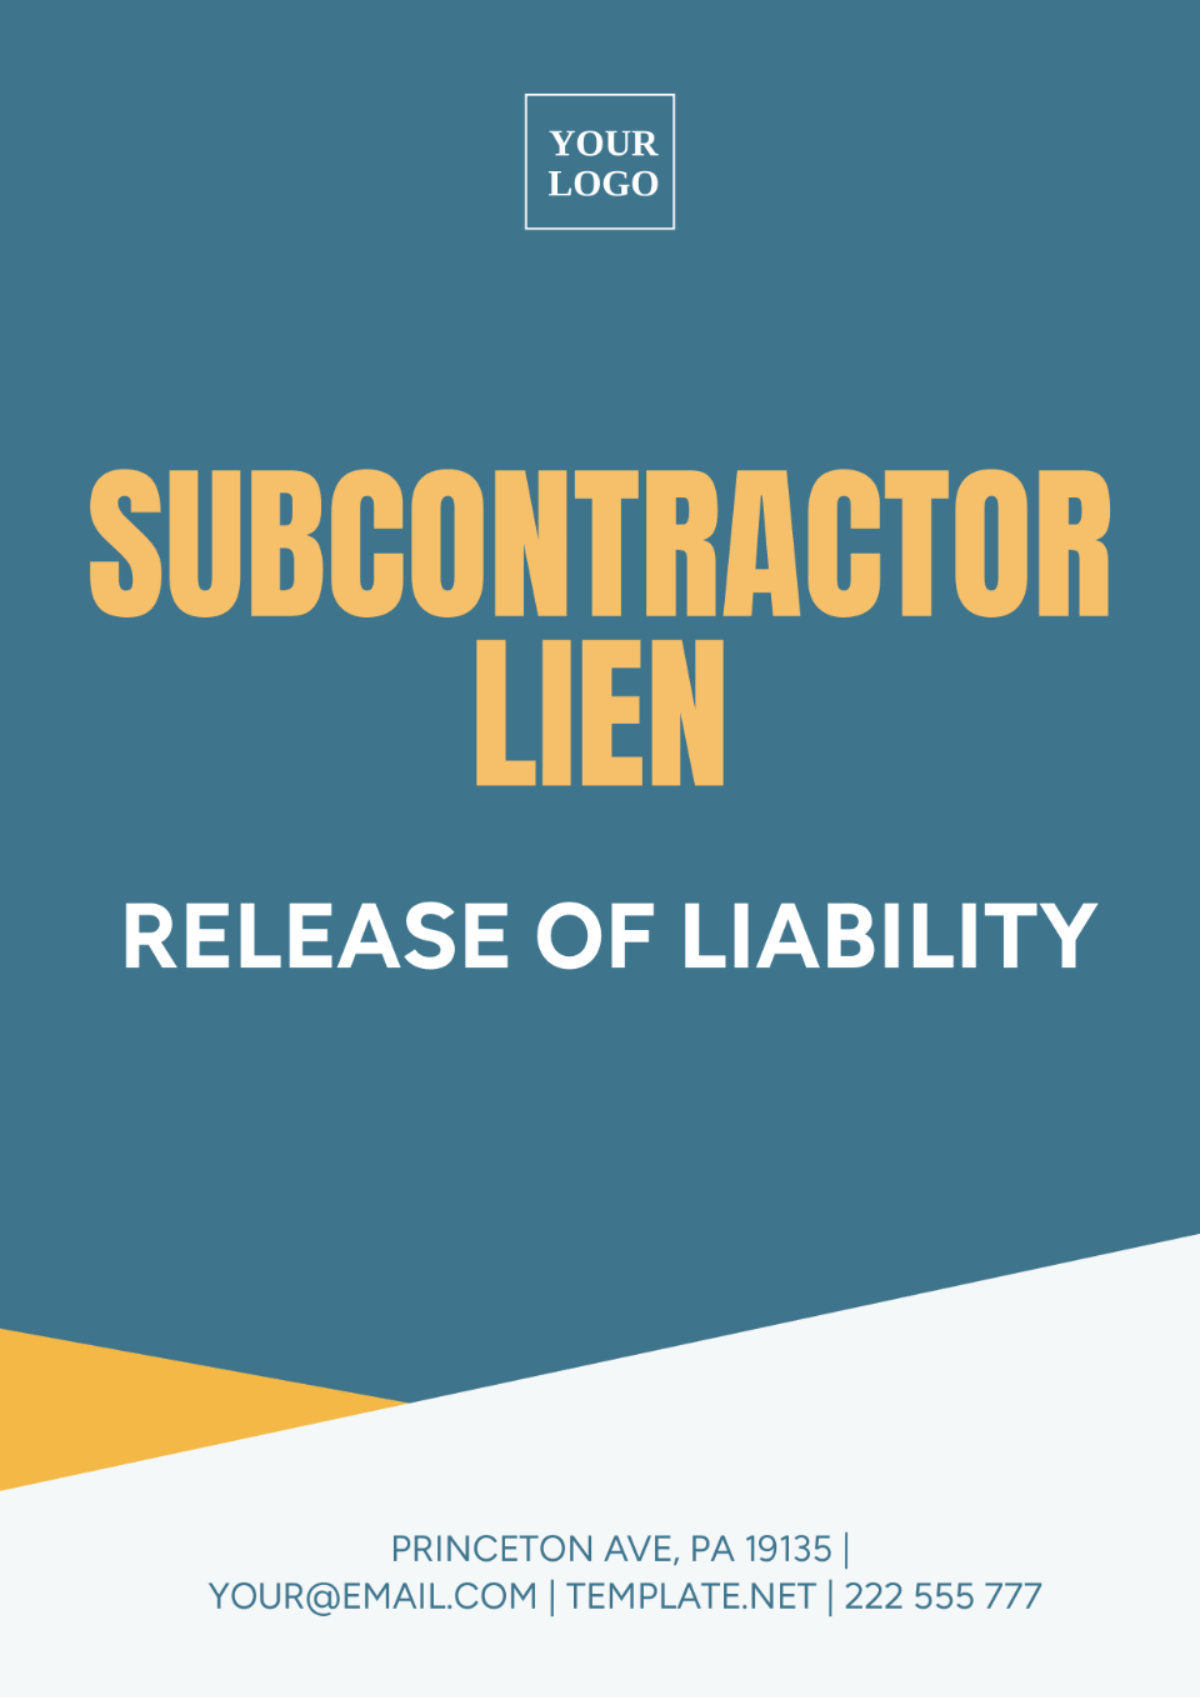 Subcontractor Lien Release of Liability Template